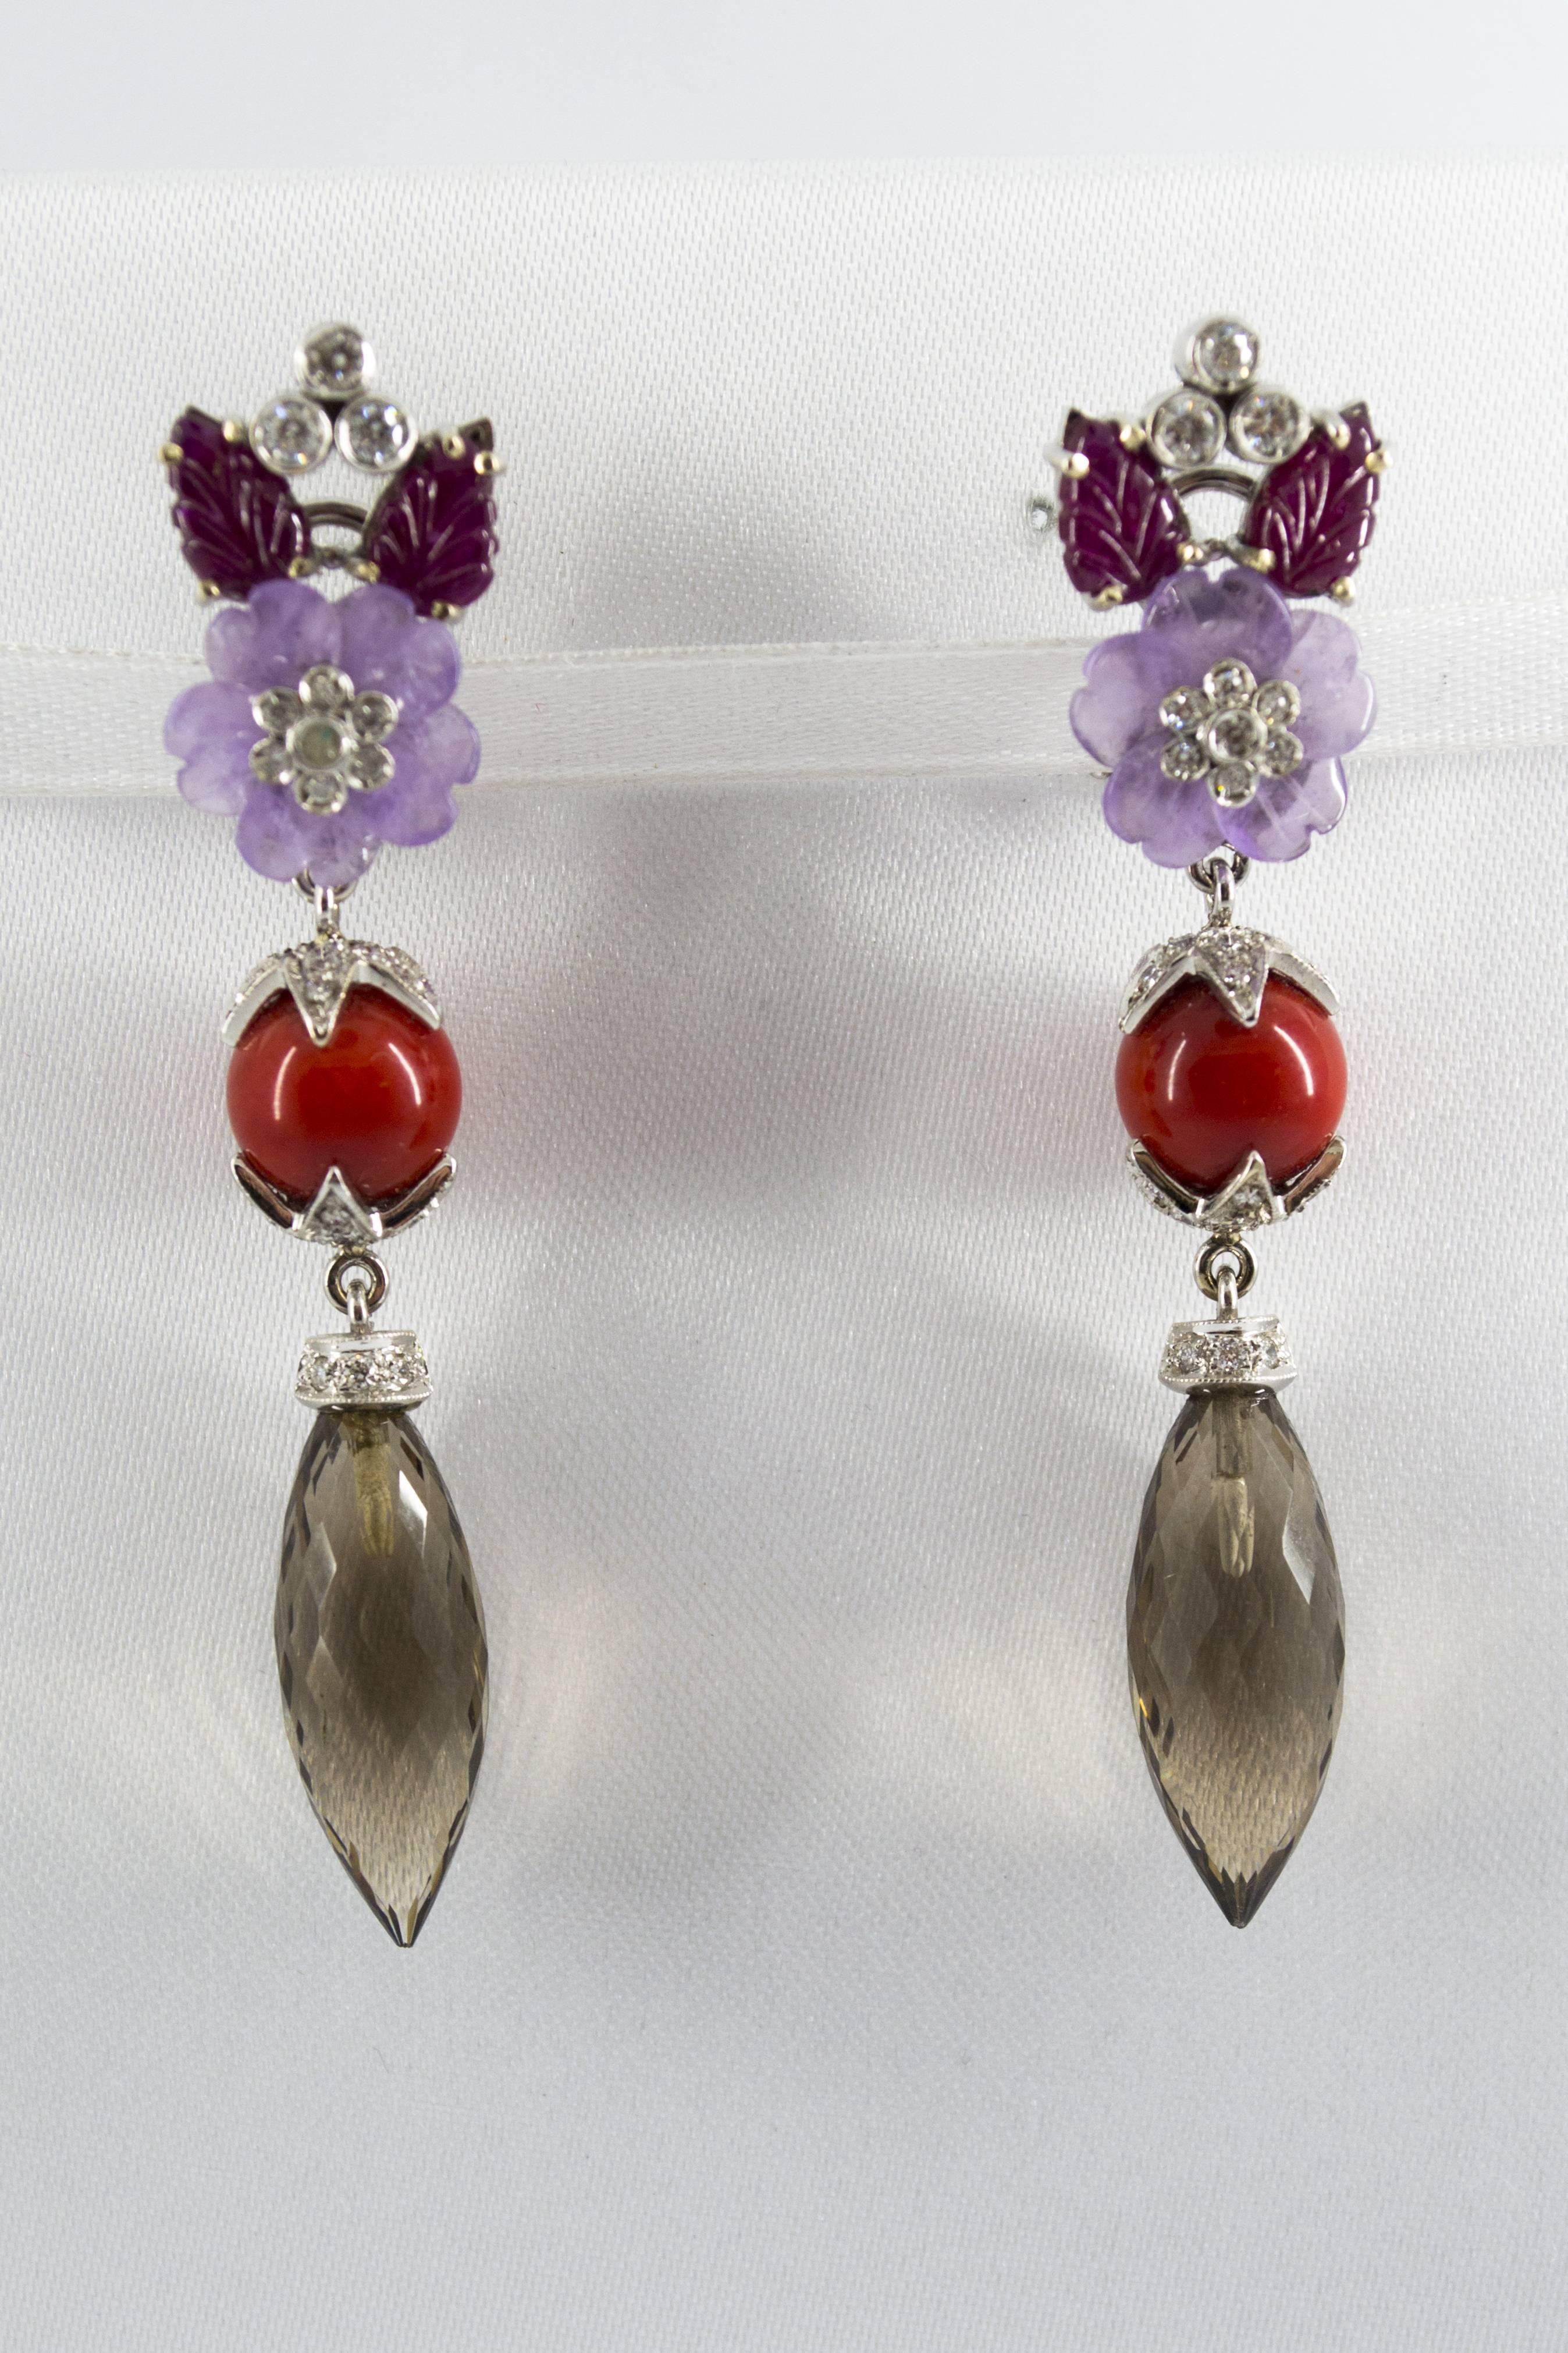 These Earrings are made of 18K White Gold.
These Earrings have 1.10 Carats of White Diamonds.
These Earrings have 4.30 Carats of Rubies.
These Earrings have also Agate, Bambù Coral and Fume Quartz.
All our Earrings have pins for pierced ears but we